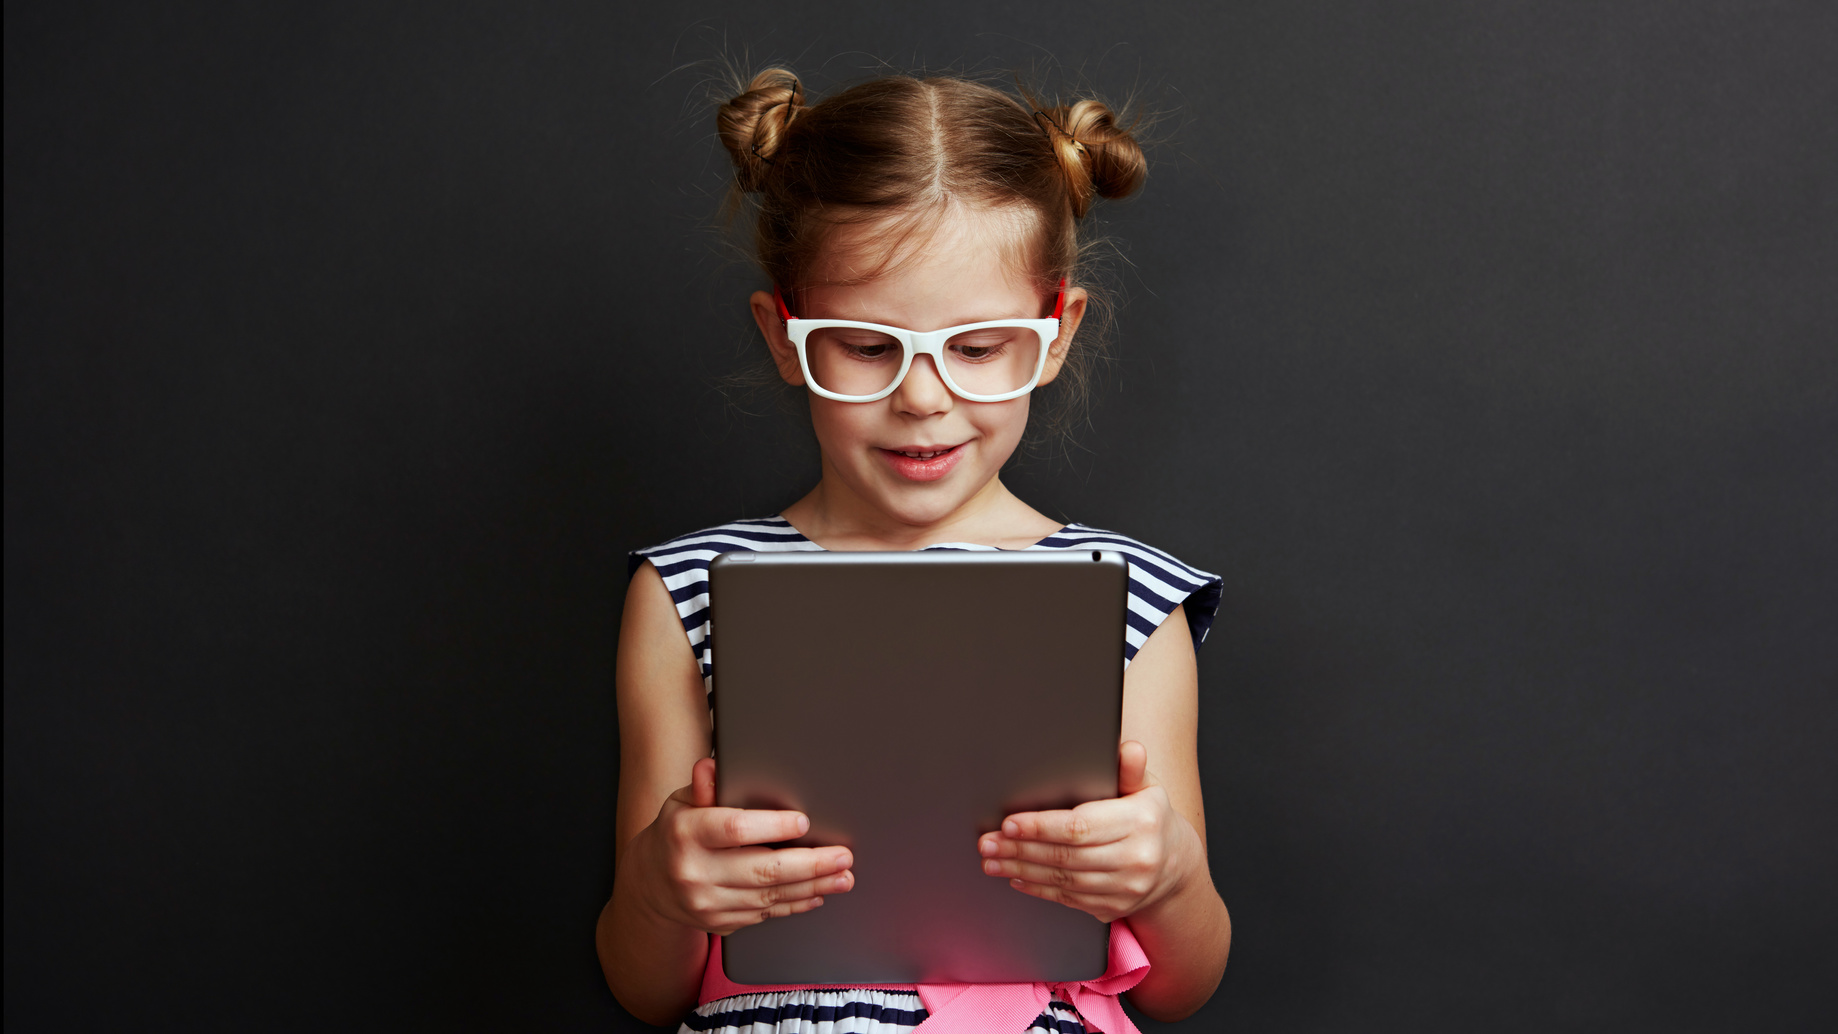 Adorable girl playing game on digital tablet over dark background. Technology and lifestyle.